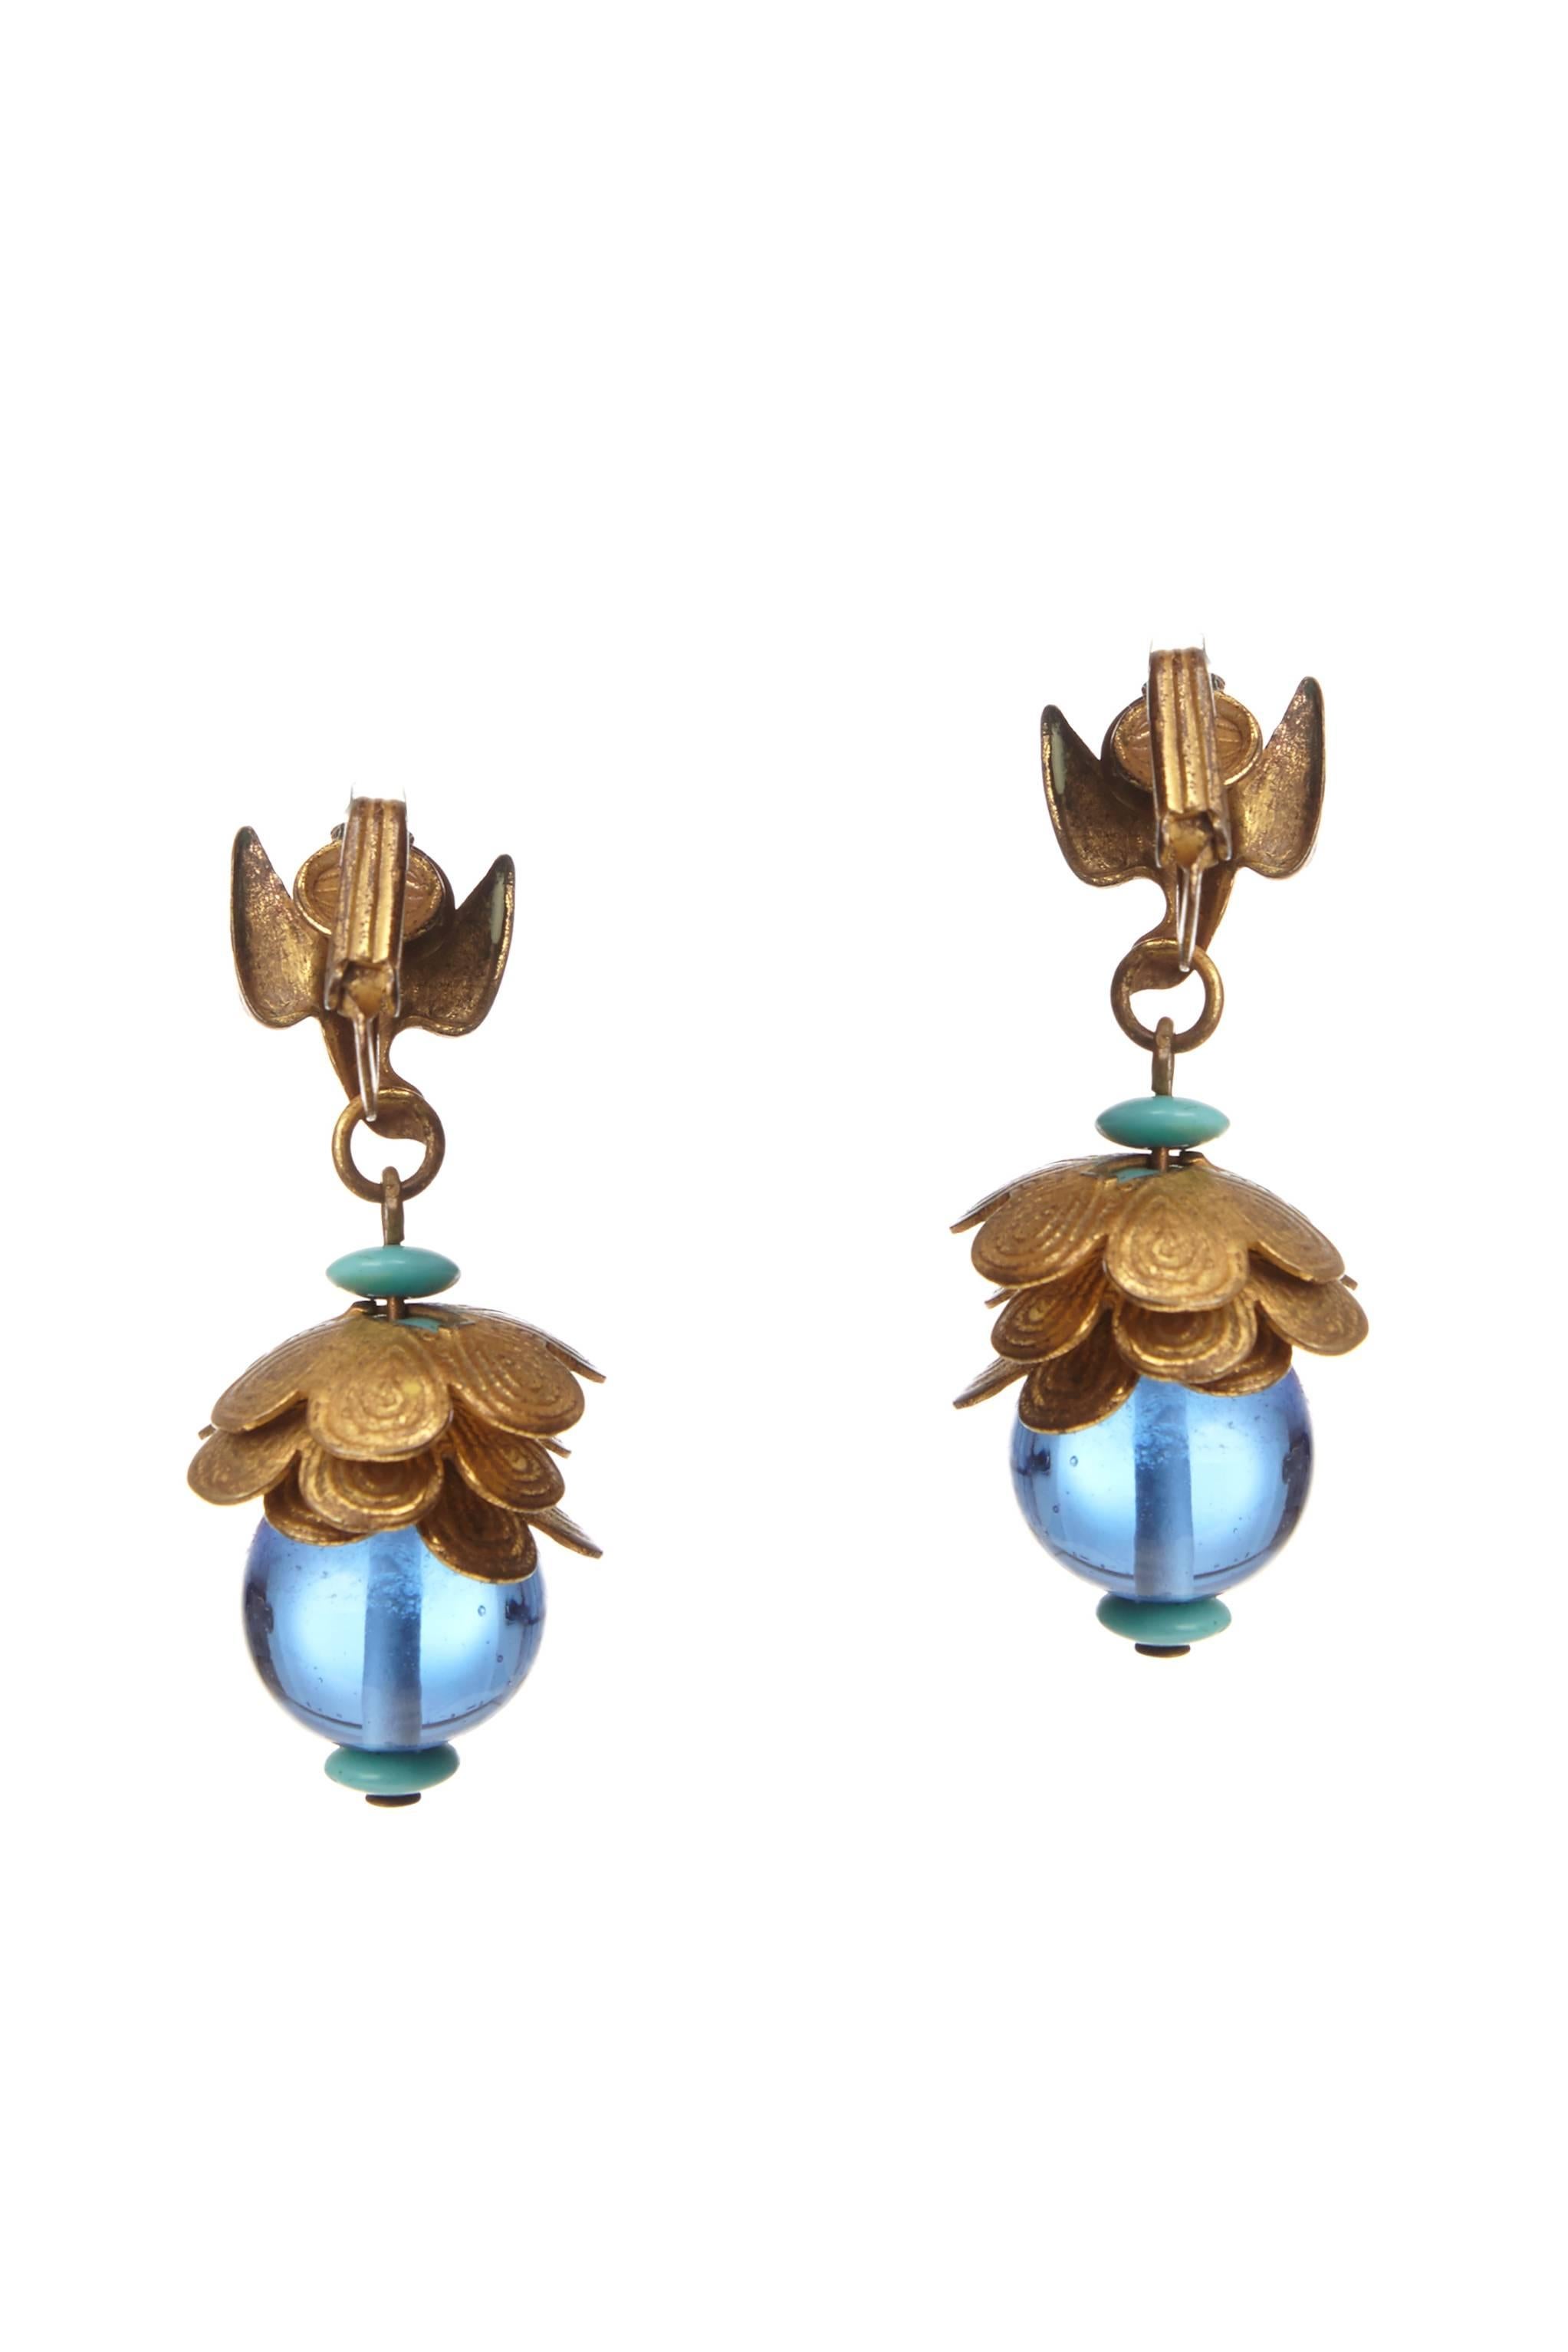 Gorgeous vintage gold tone metal clip-on earrings with blue glass beads by Miriam Haskell.  They were designed during the period of Larry Vrba's reign as the head designer and several similar peices can be seen in Cathy Gordon's book. This lovely